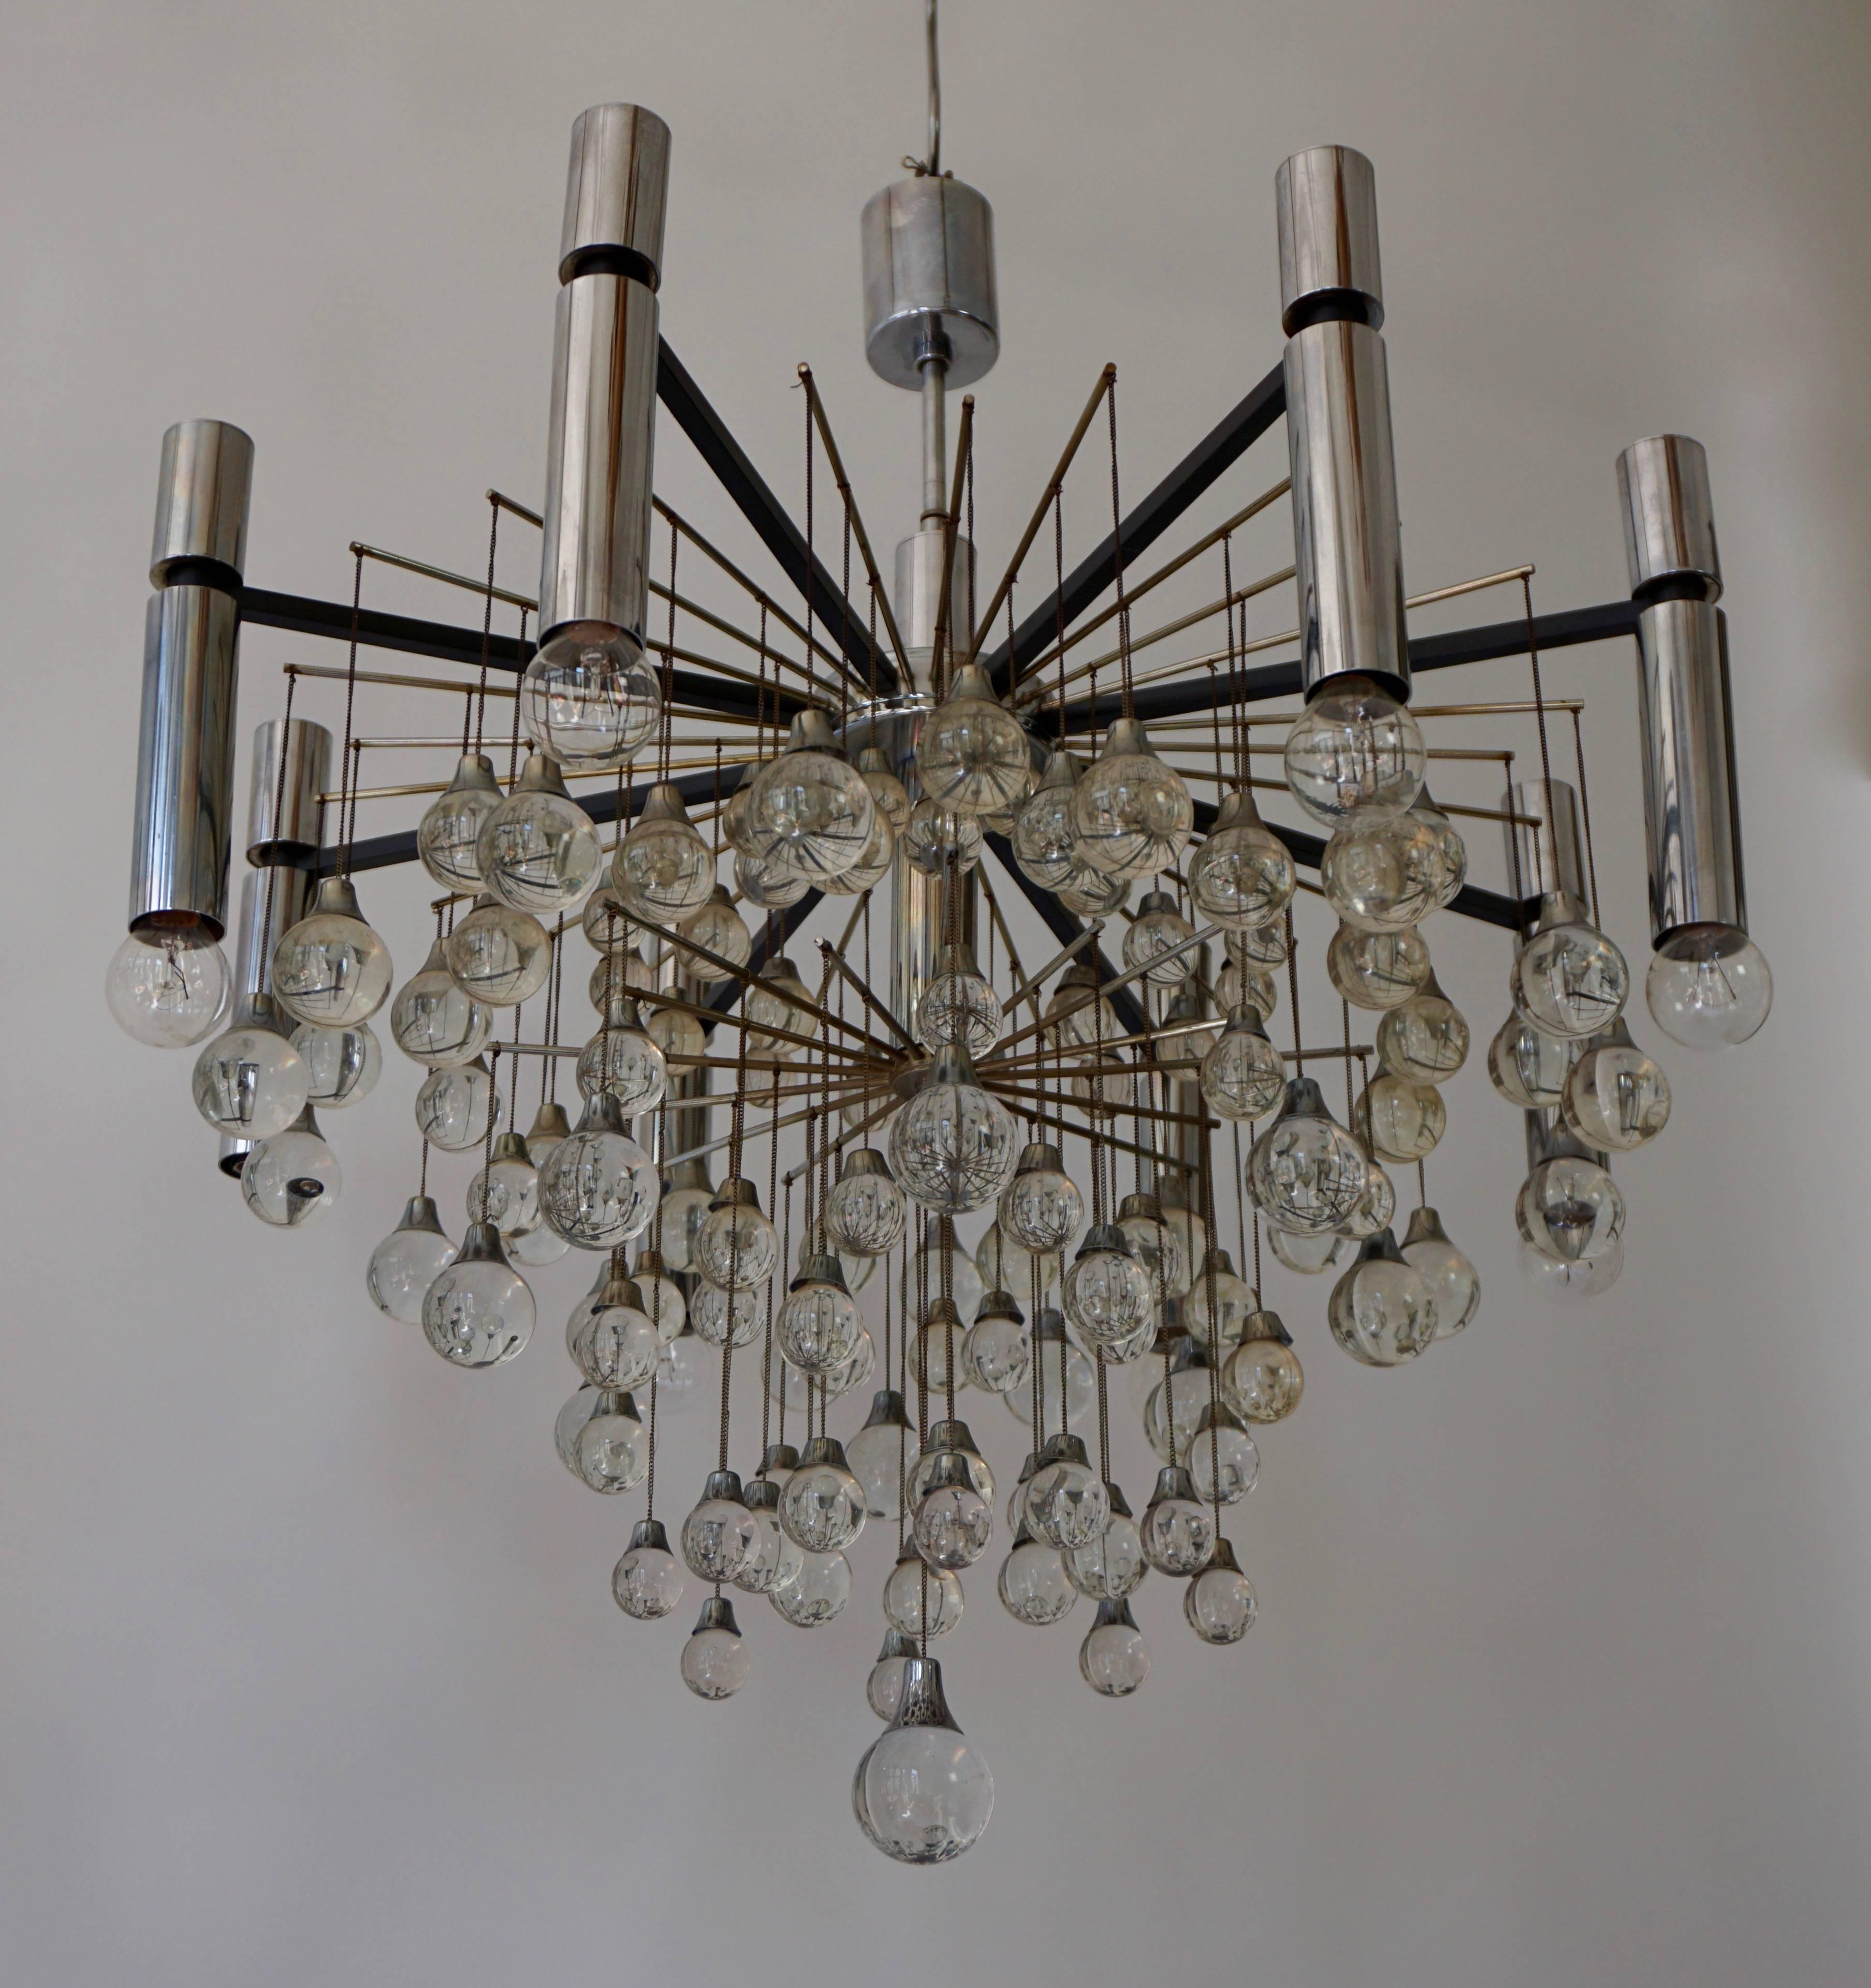 Two Gaetano Sciolari Crystal Drops Chandeliers.

Materials: Round lampshade made of chromed metal rods, tubes and parts in iron and brass. Black rectangular rods. Thin brass rods. Crystal bubble glass beads or pearls in a drop form. Metal chains.